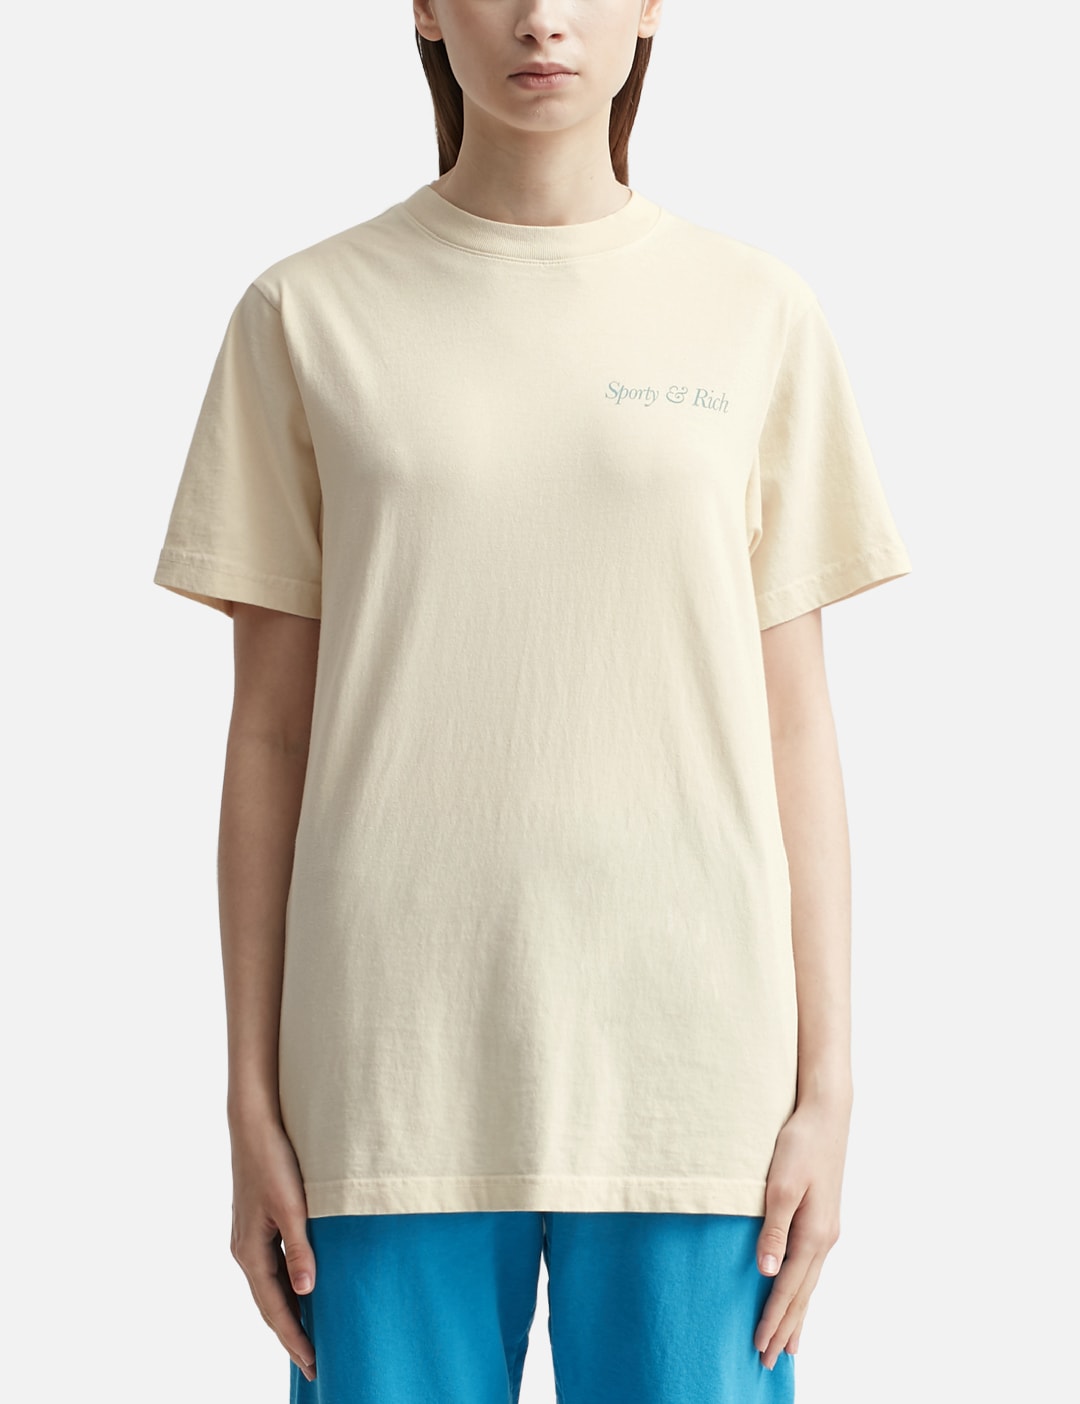 Sporty & Rich - HWCNY T-shirt | HBX - Globally Curated Fashion and ...